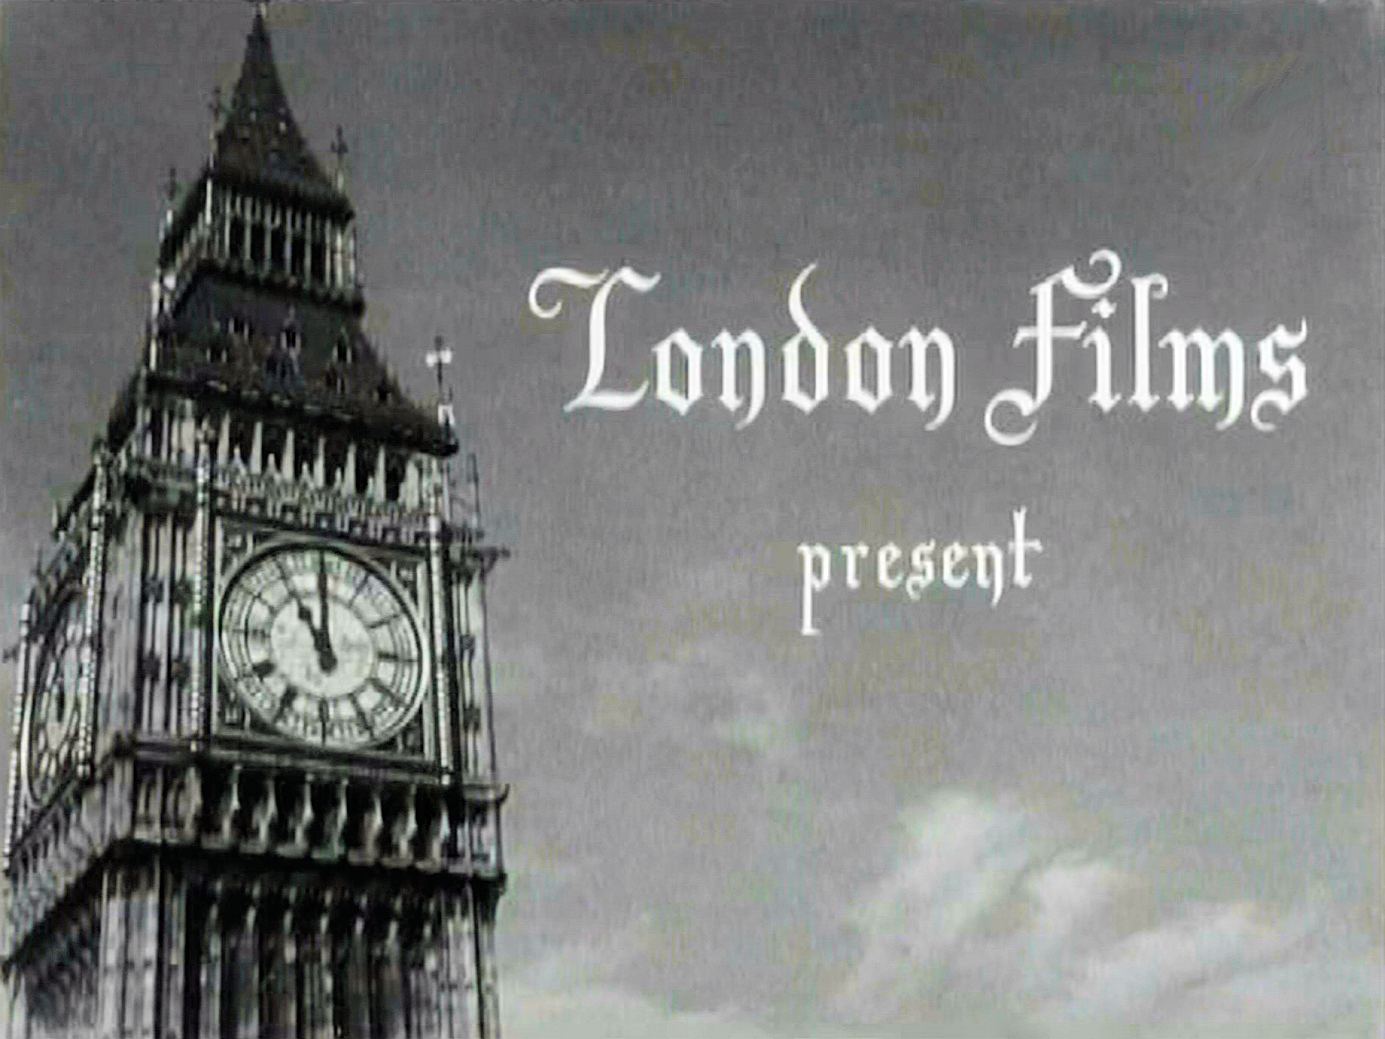 Main title from The Holly and the Ivy (1952) (1).  London Films present